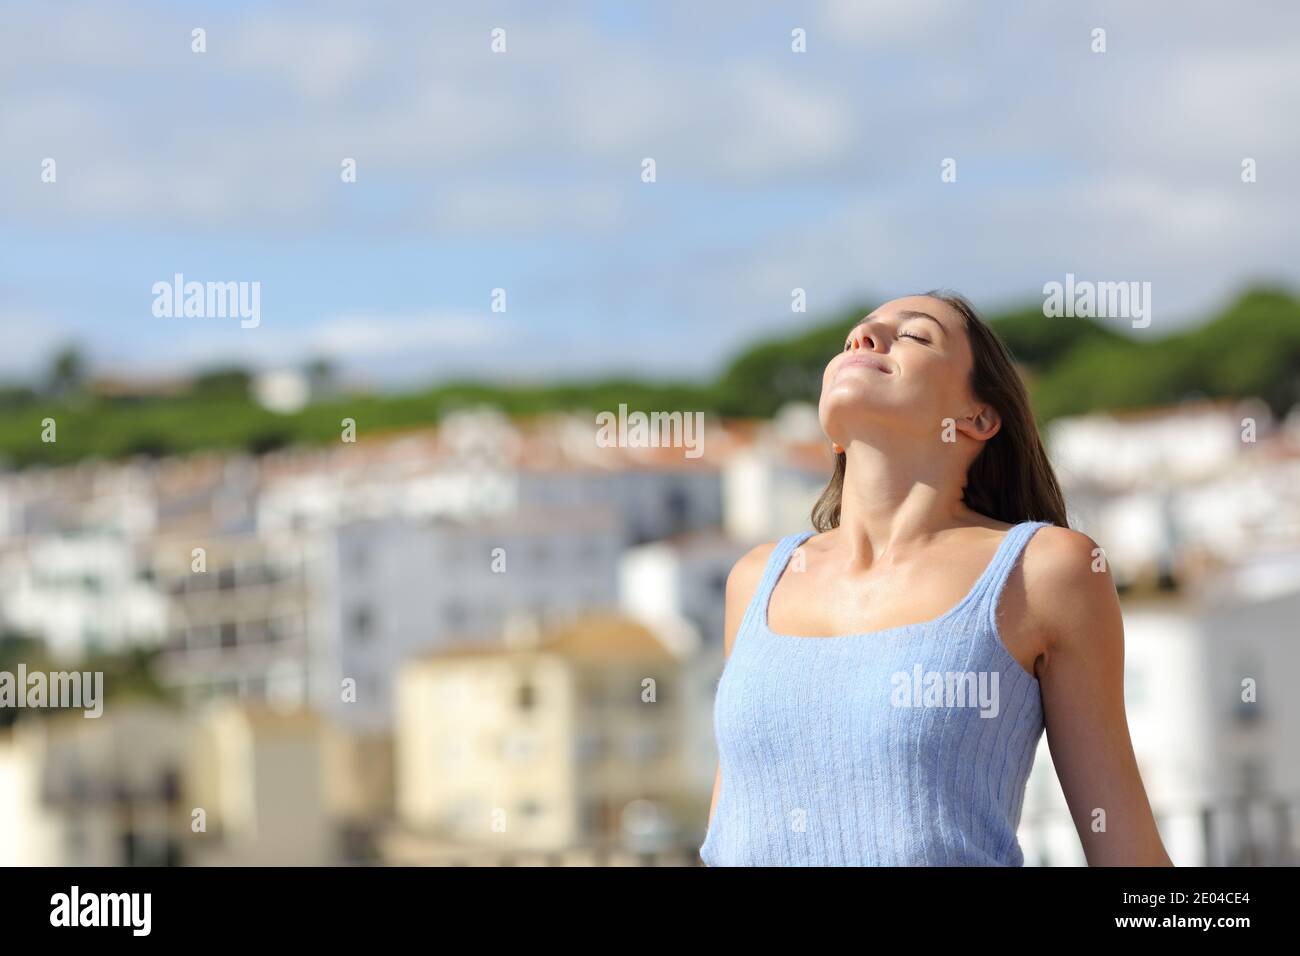 Satisfied woman relaxing breathing fresh air in a rural town Stock Photo